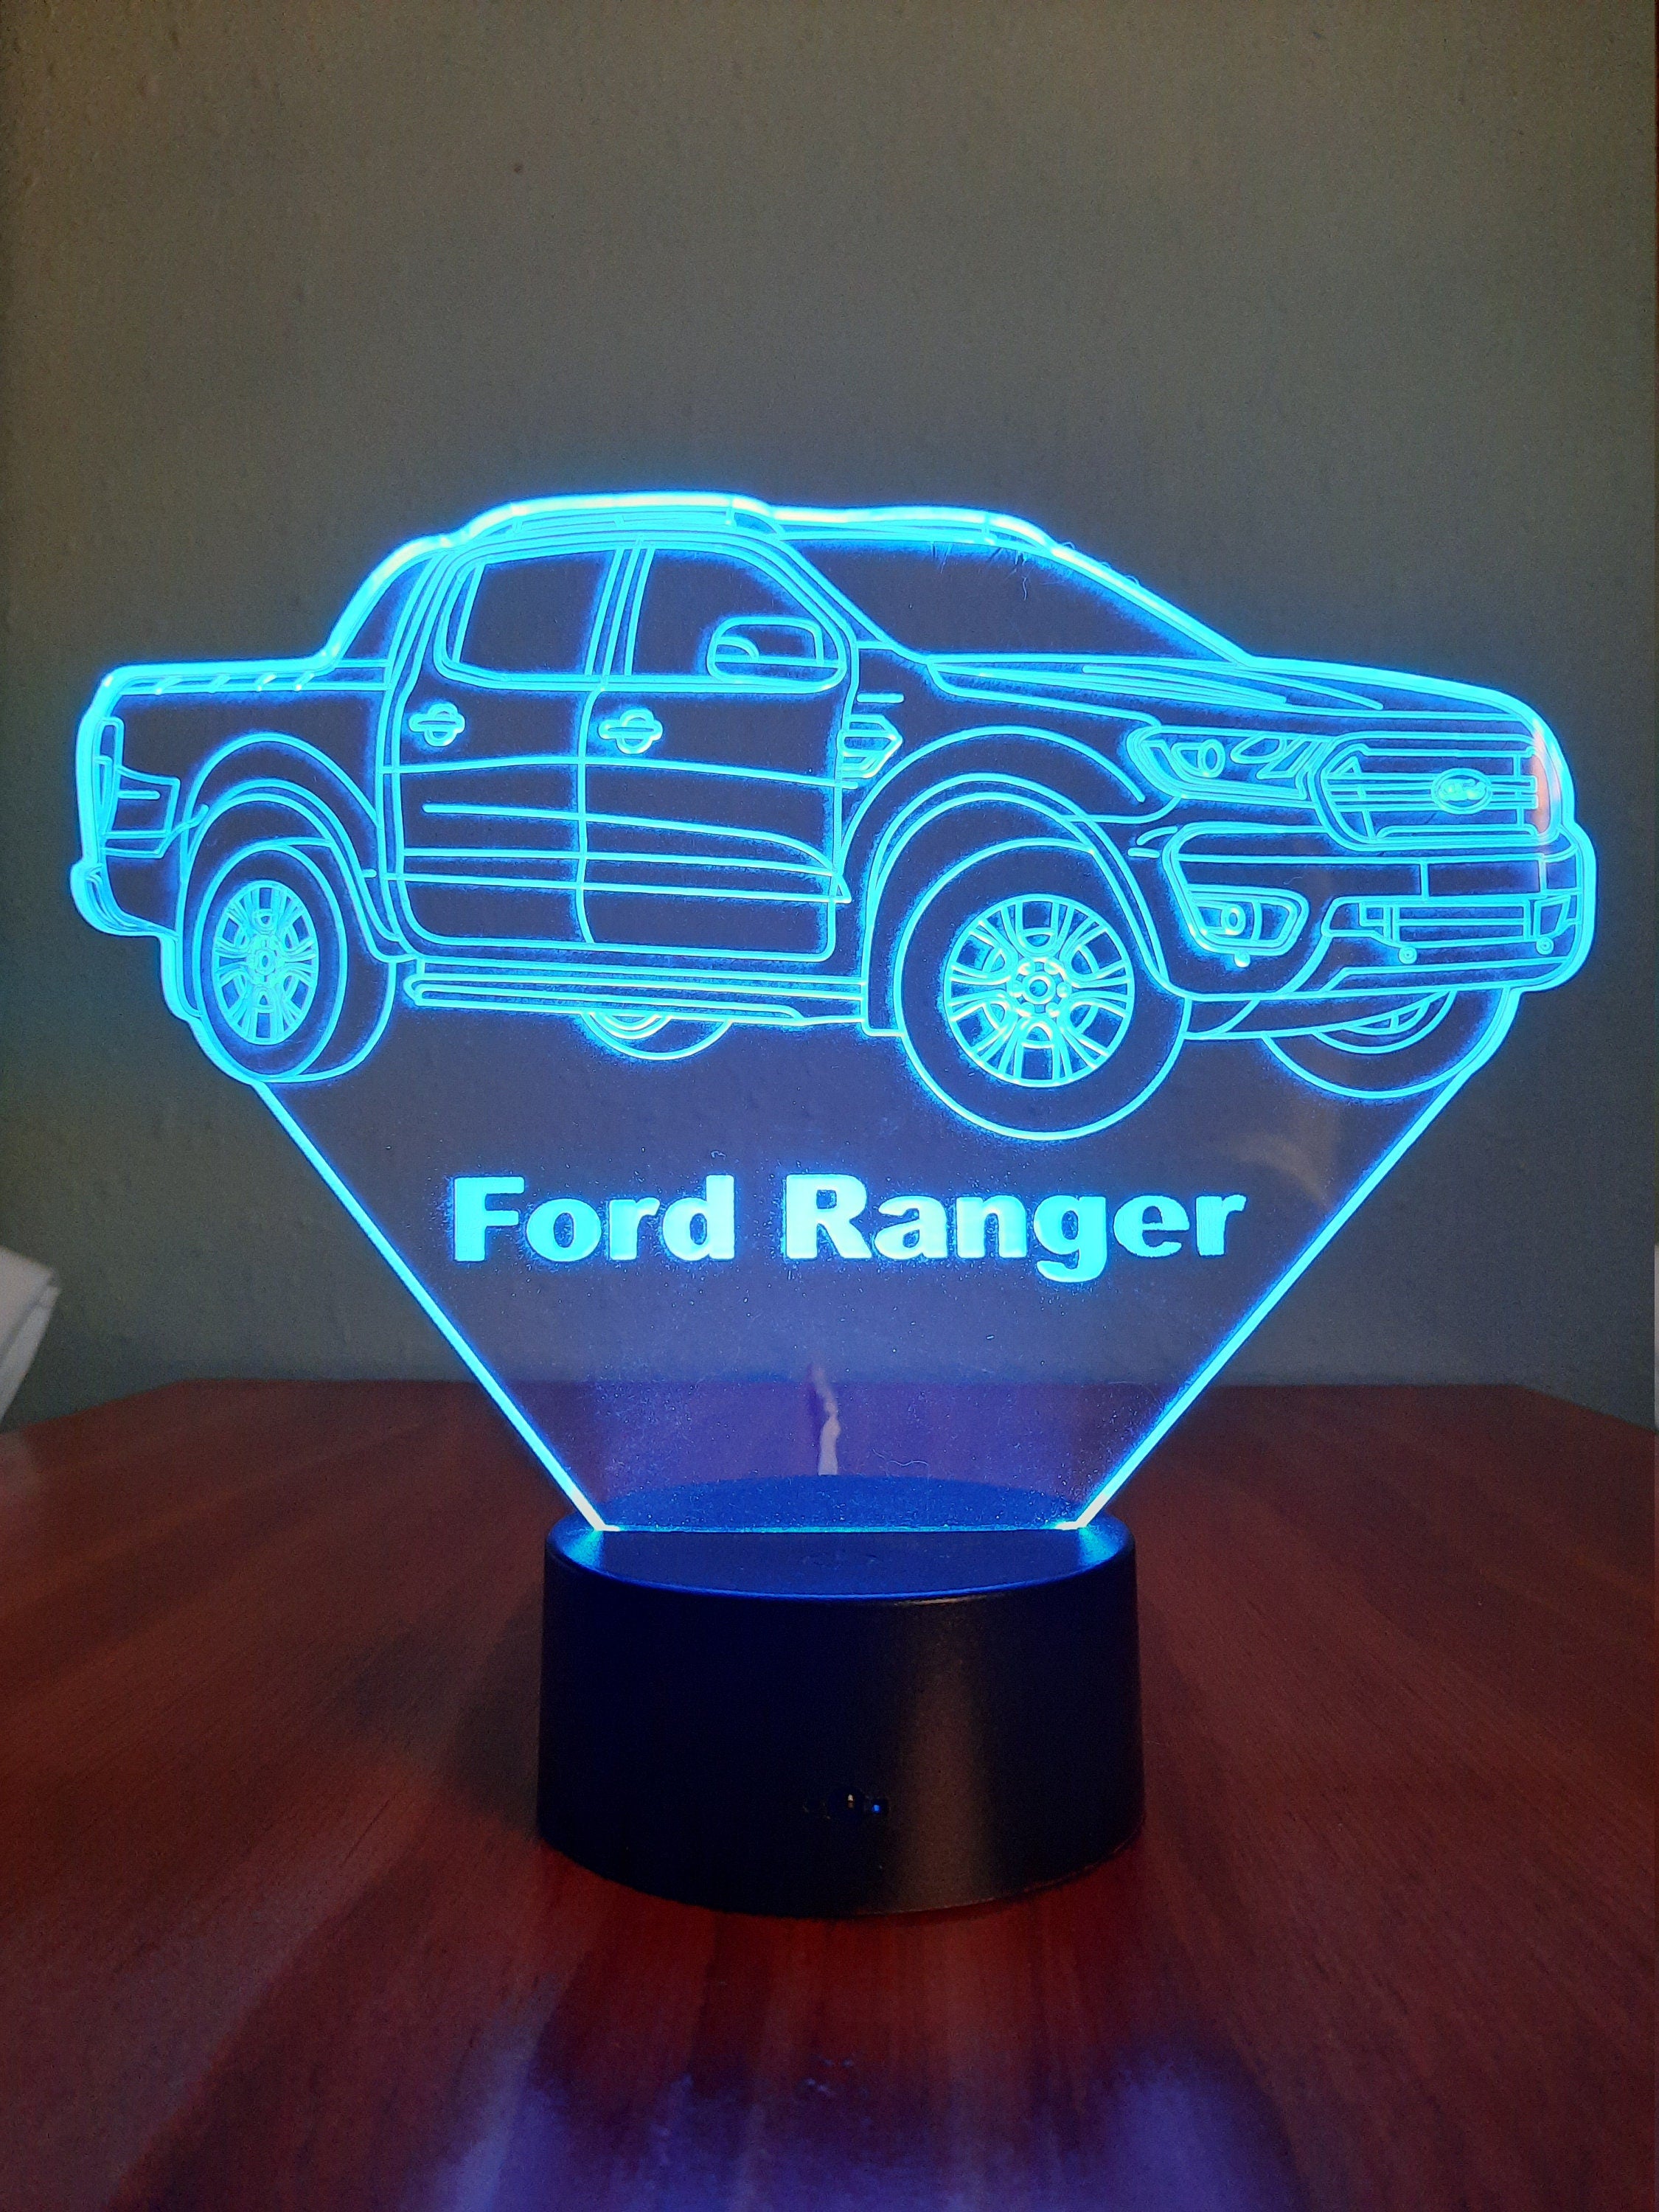 Awesome "Ford Ranger" 3D LED lamp (1229) - FREE SHIPPING!